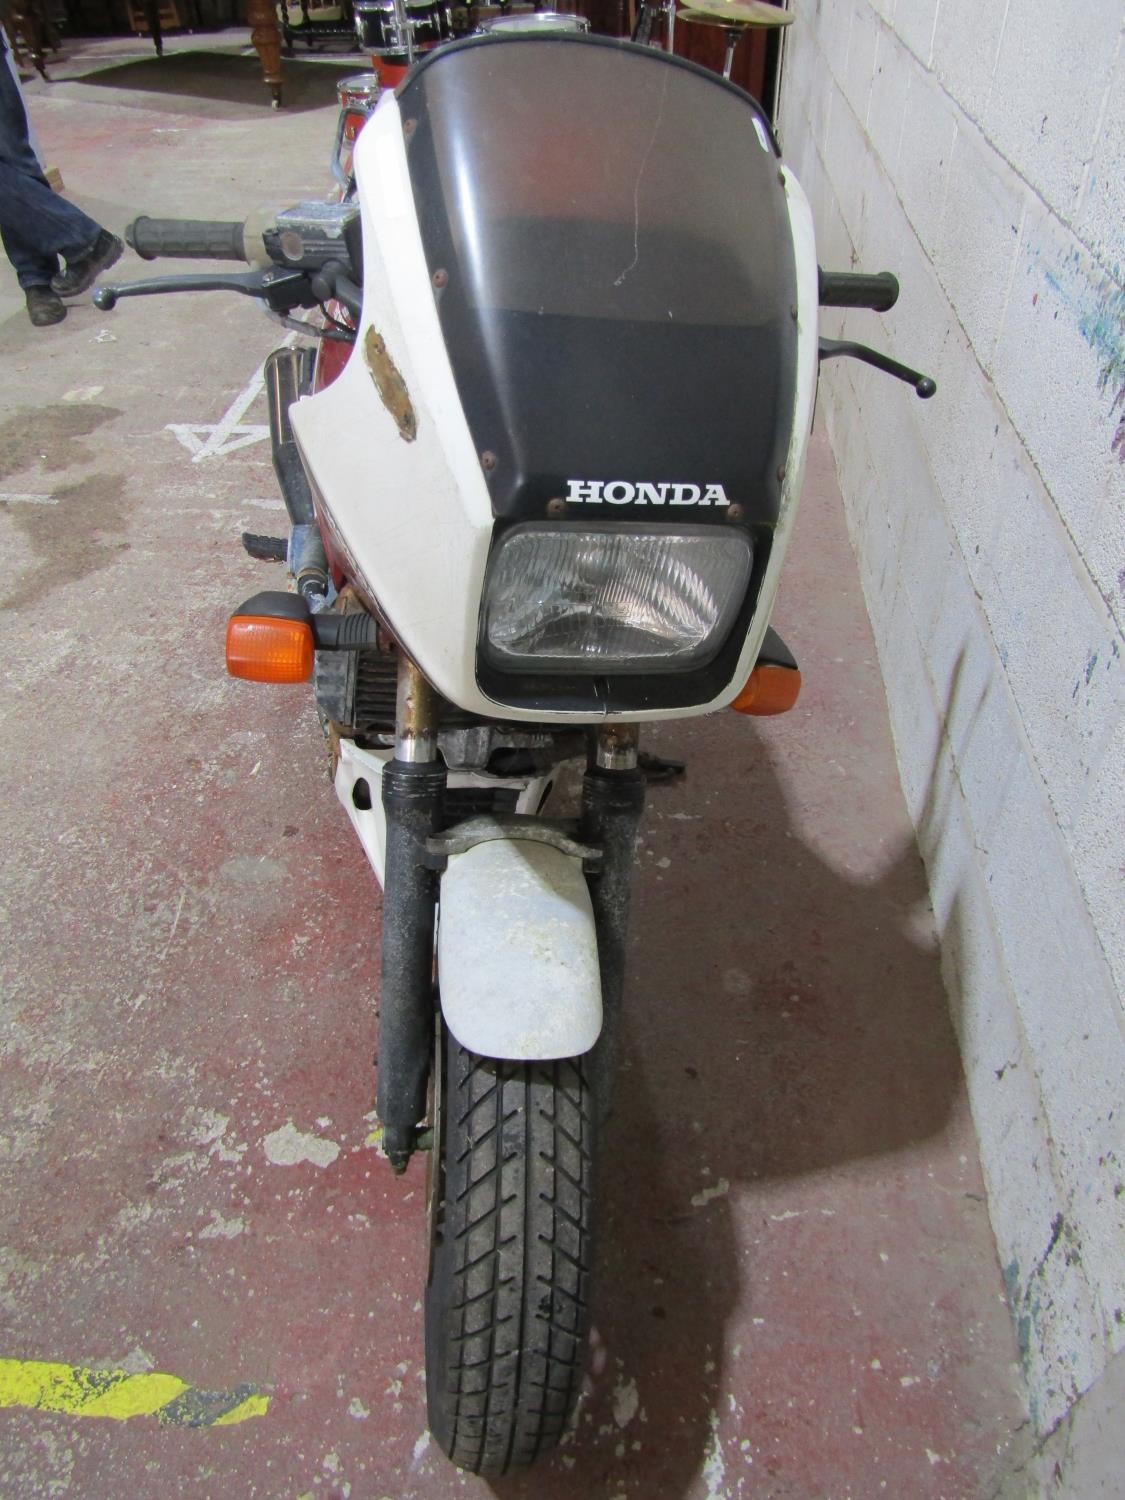 A Honda VF750 V-Twin motorcycle, registration number A25 TWA (no V5C logbook present) Sold without - Image 7 of 10